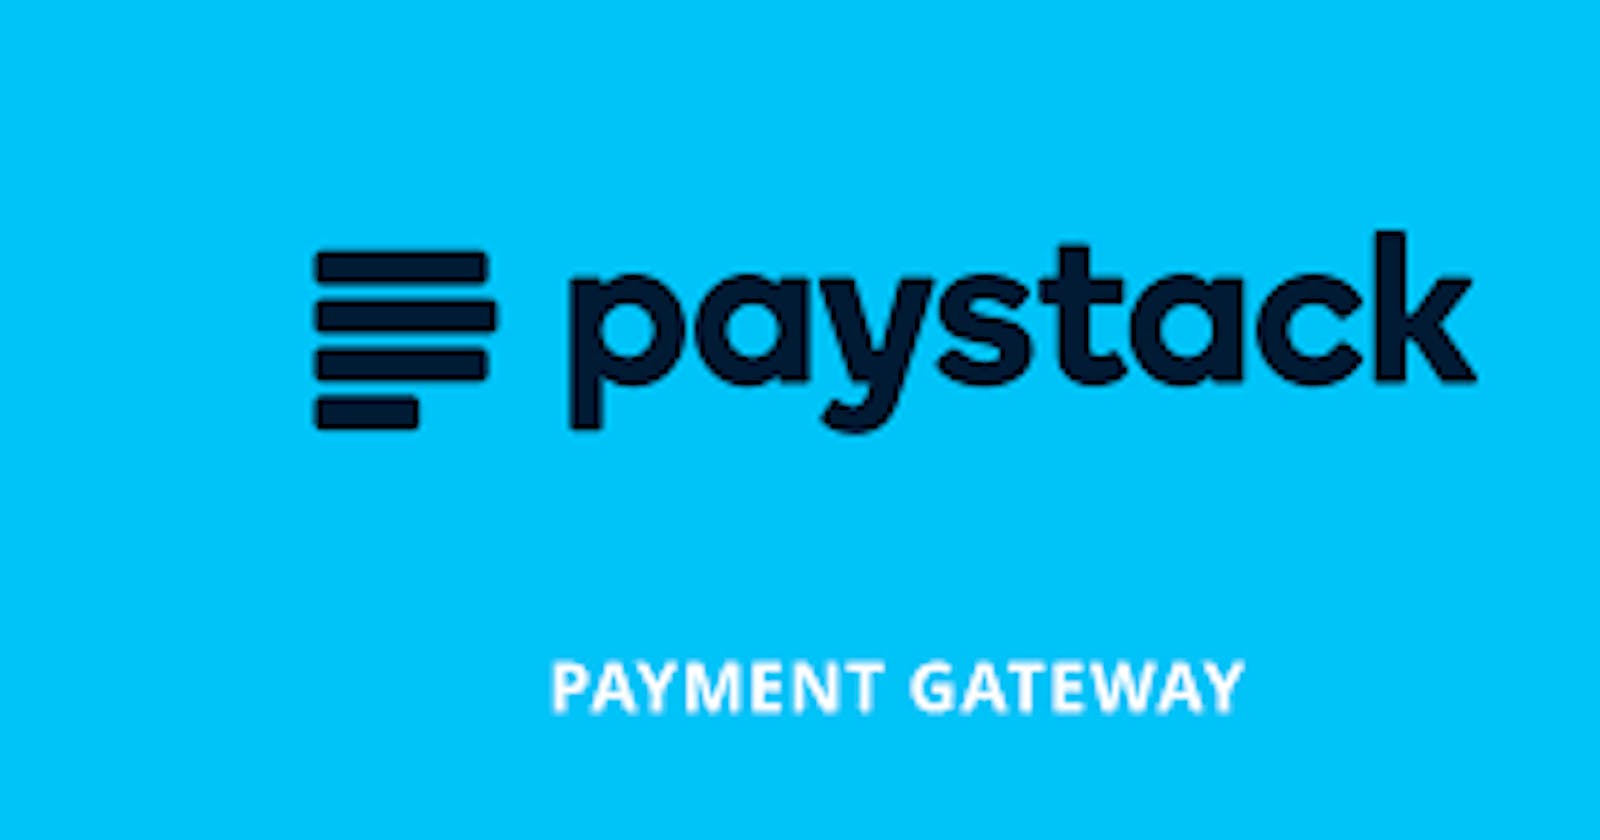 Integrate Paystack Payment Gateway using Spring Boot